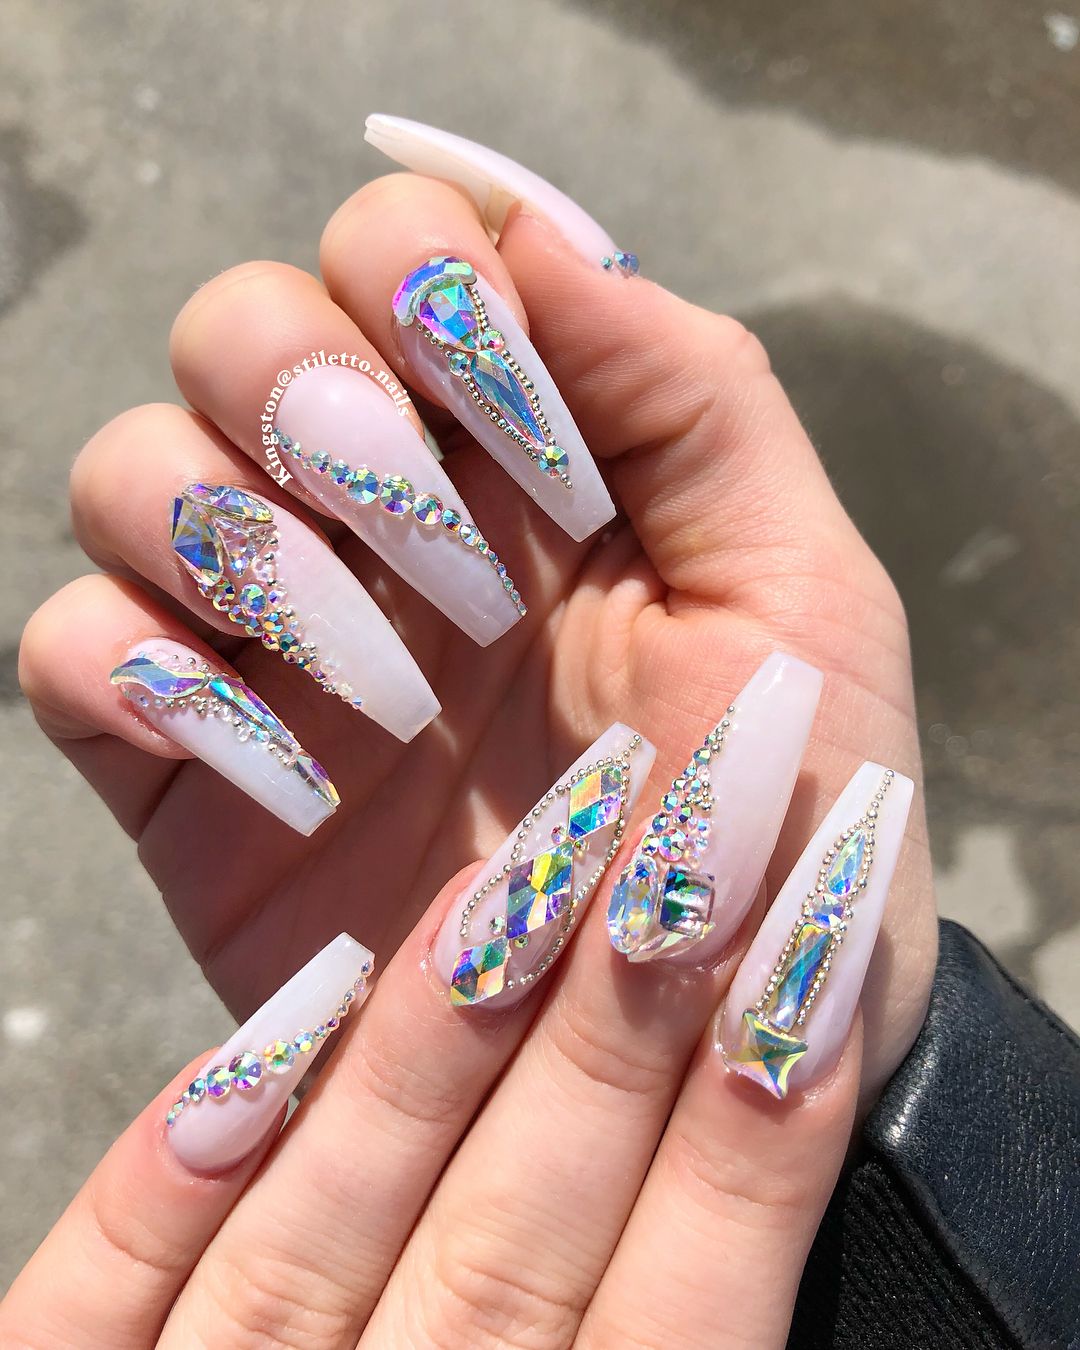 Jeweled-Luxury-Nails.-1 Top 70+ Most Luxurious Nail Design Ideas in 2022